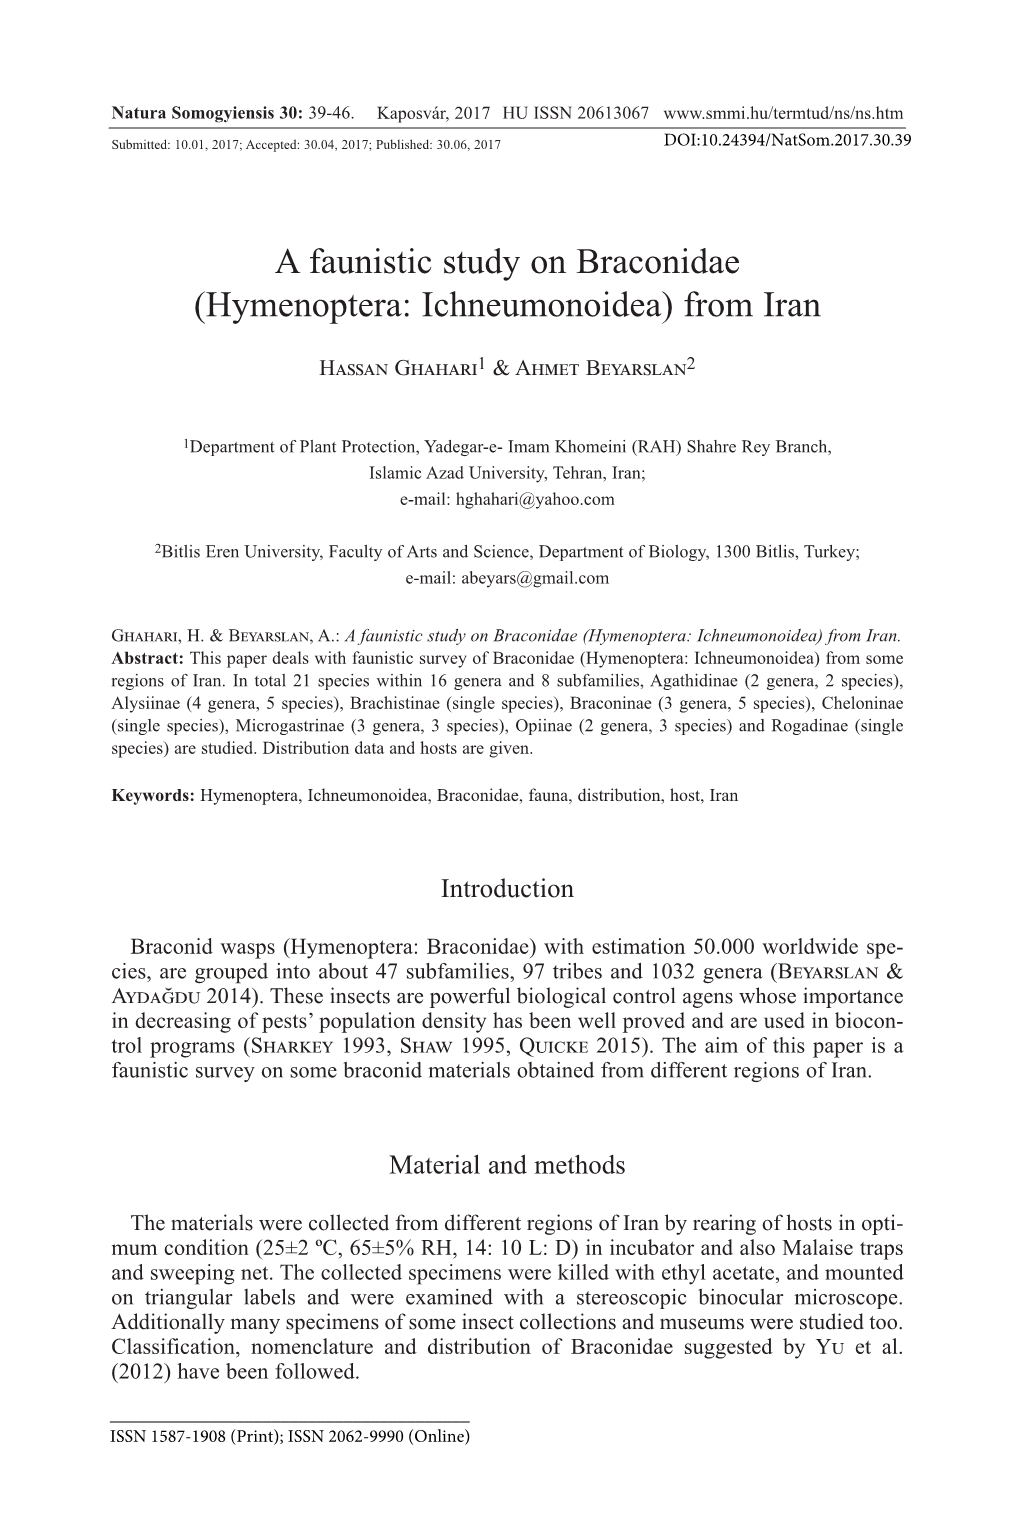 A Faunistic Study on Braconidae (Hymenoptera: Ichneumonoidea) from Iran